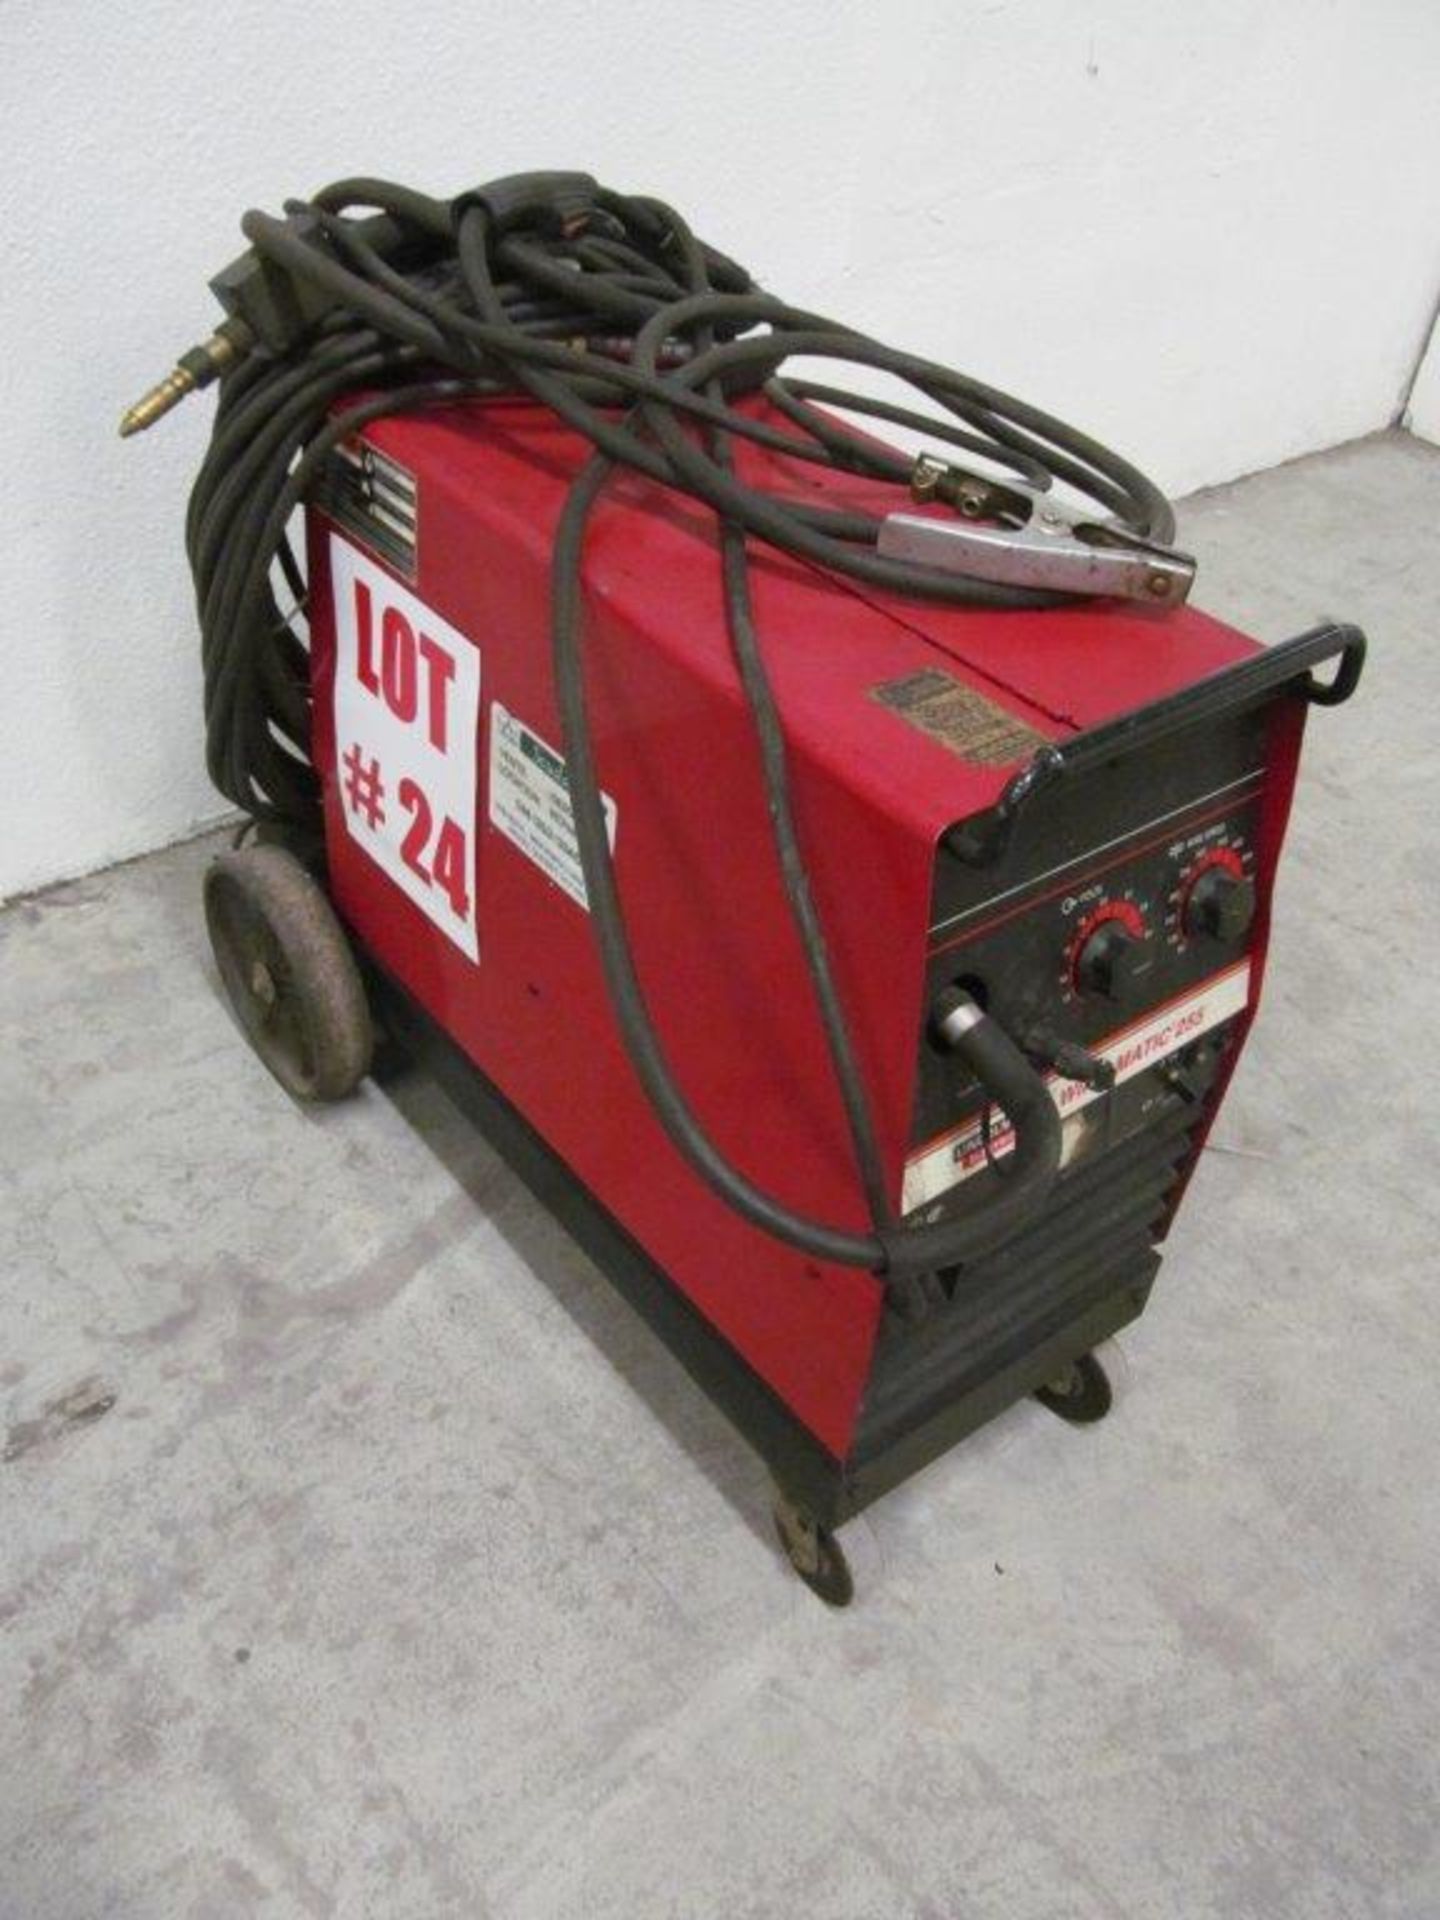 LINCOLN WIRE-MATIC 255 DC WELDER WITH WIRE FEEDER, S/N: U1950319563, ELECTRICS: 208V/230V/3PH/60C